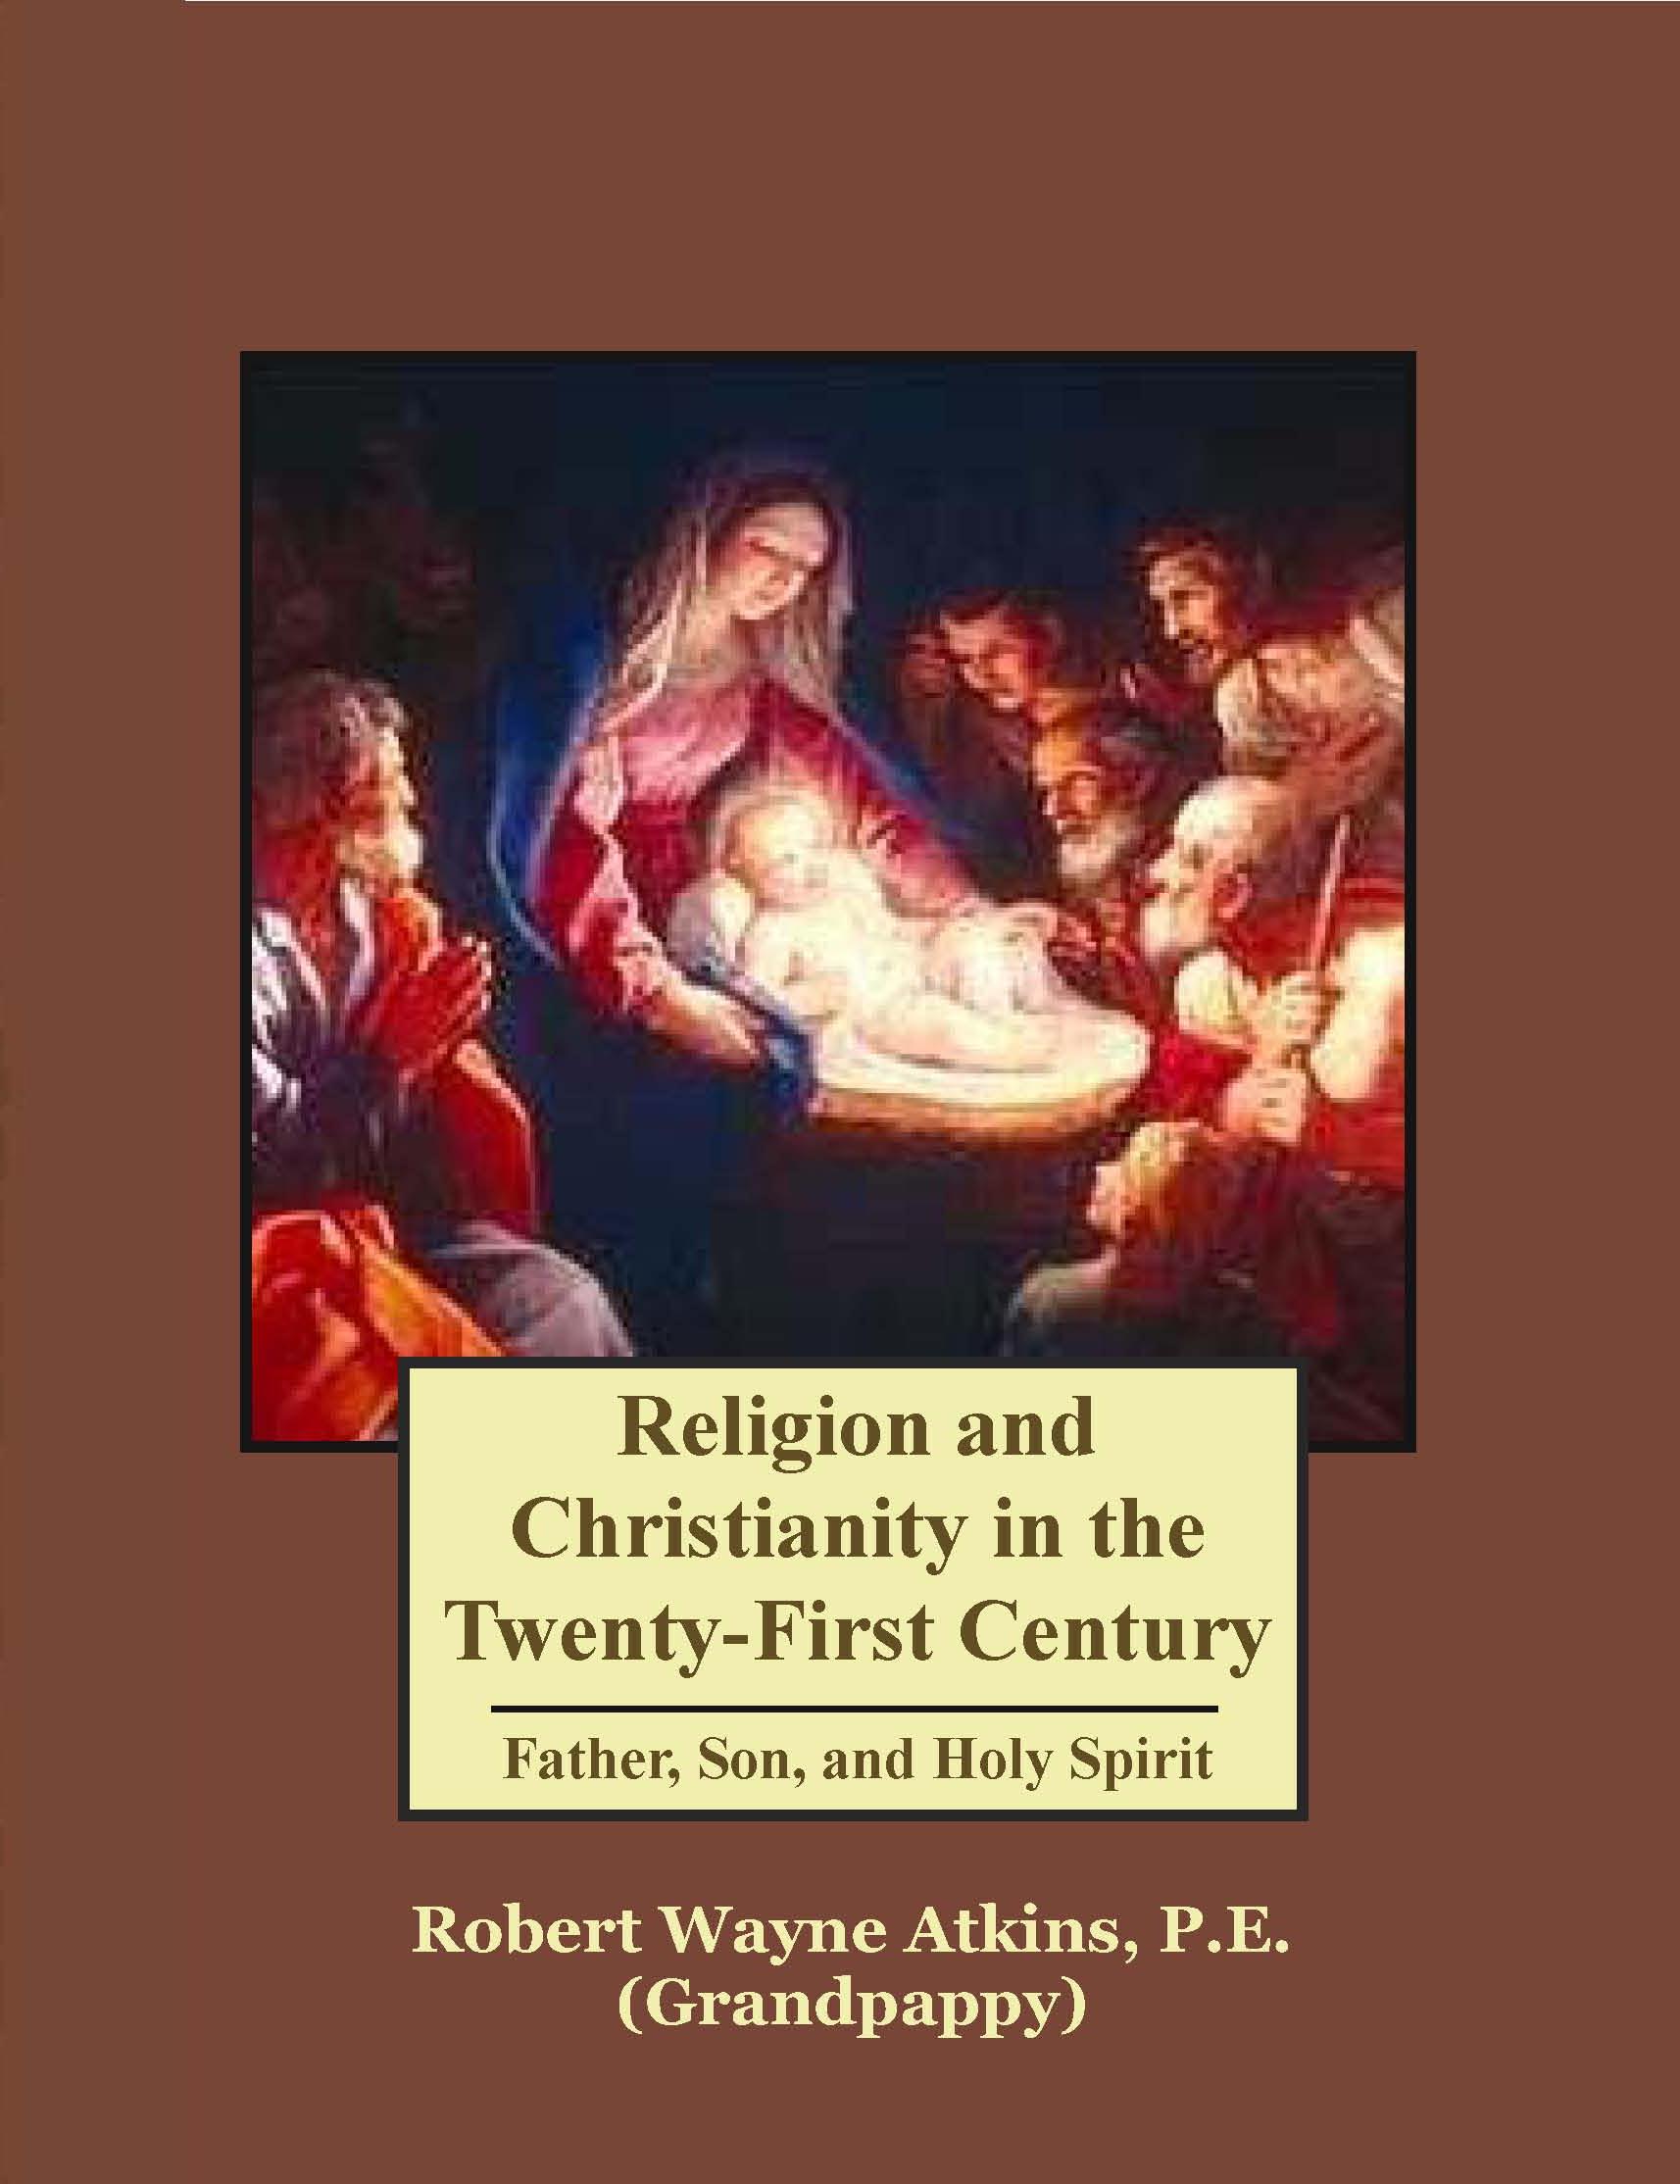 Direct Link to Amazon Web page for Religion and Christianity in the Twenty-First Century